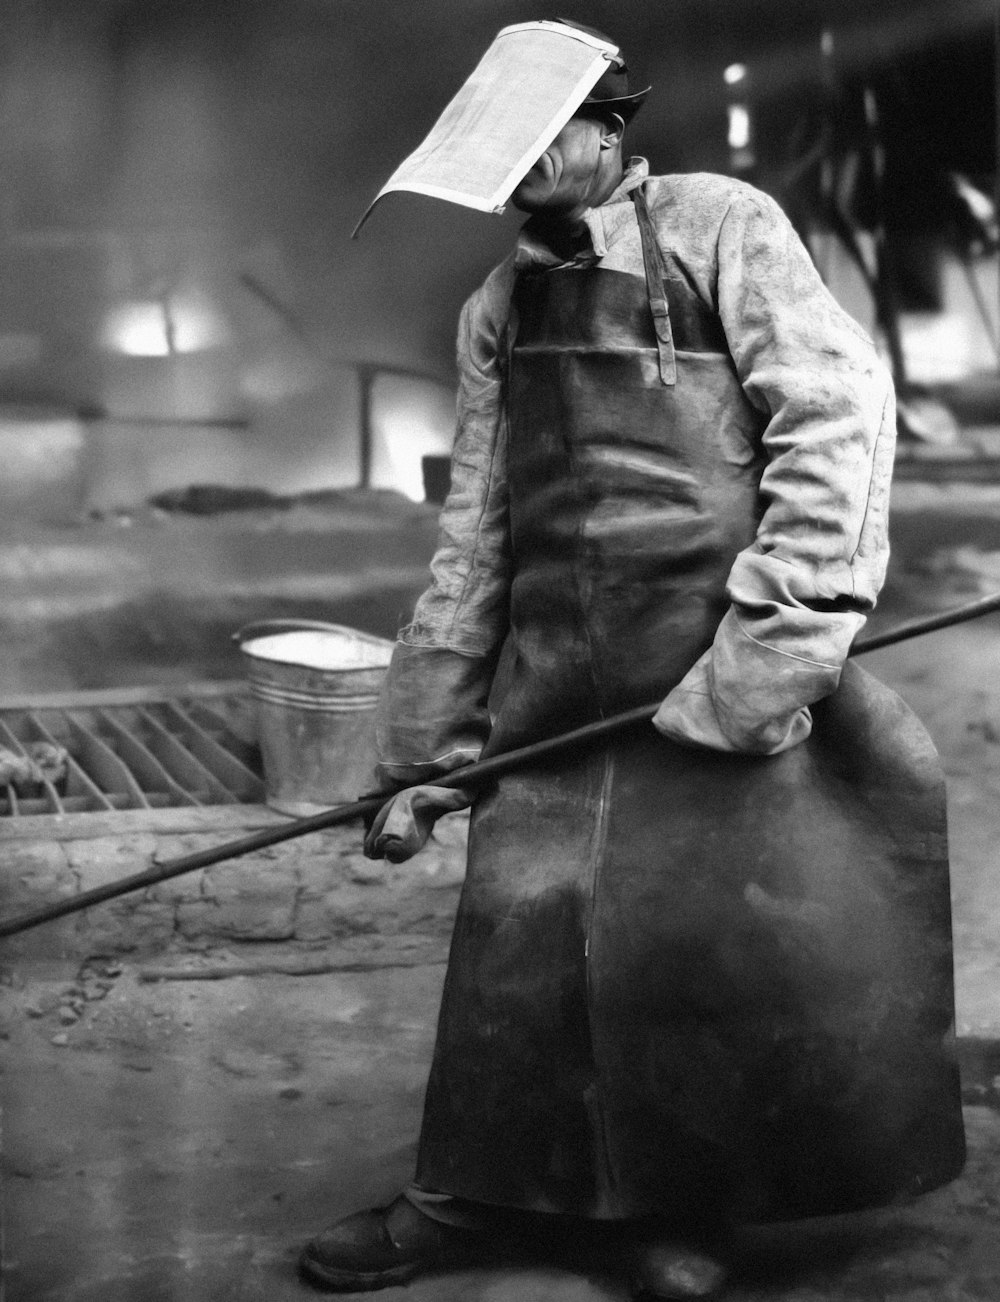 a black and white photo of a man with a hat and apron